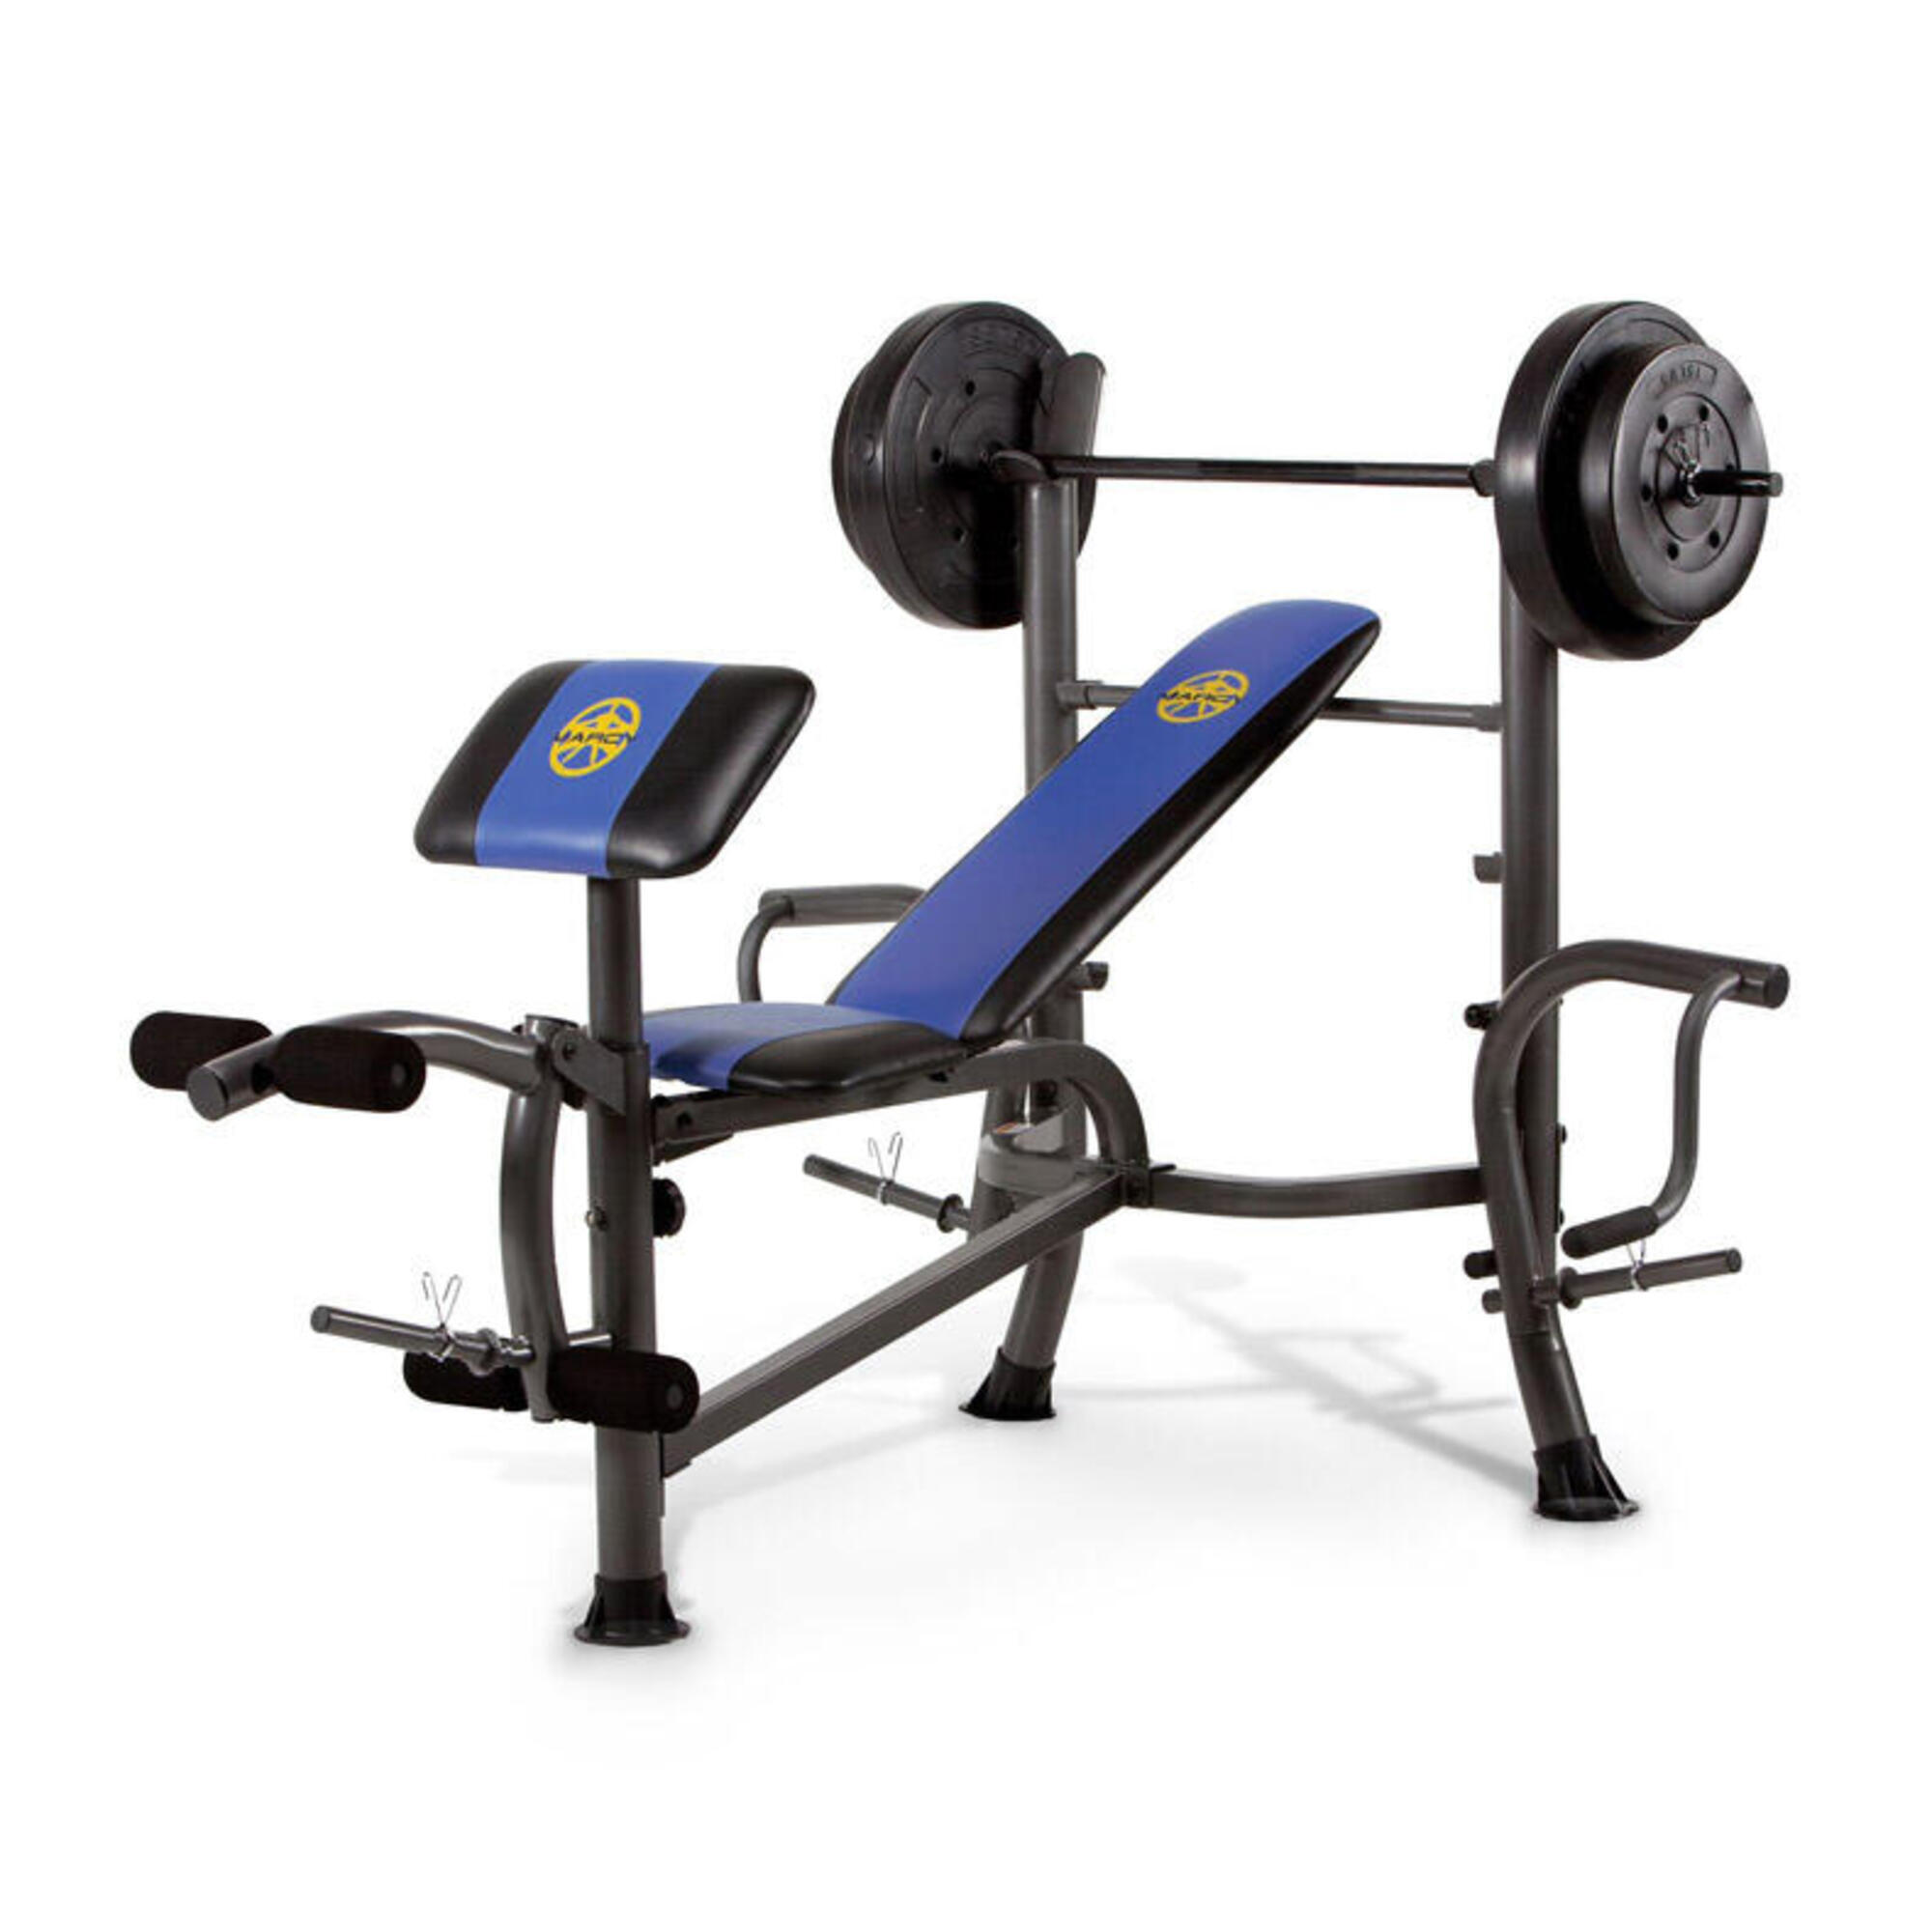 MARCY MARCY MWB-36780B STARTER WEIGHT BENCH AND 35KG WEIGHT SET